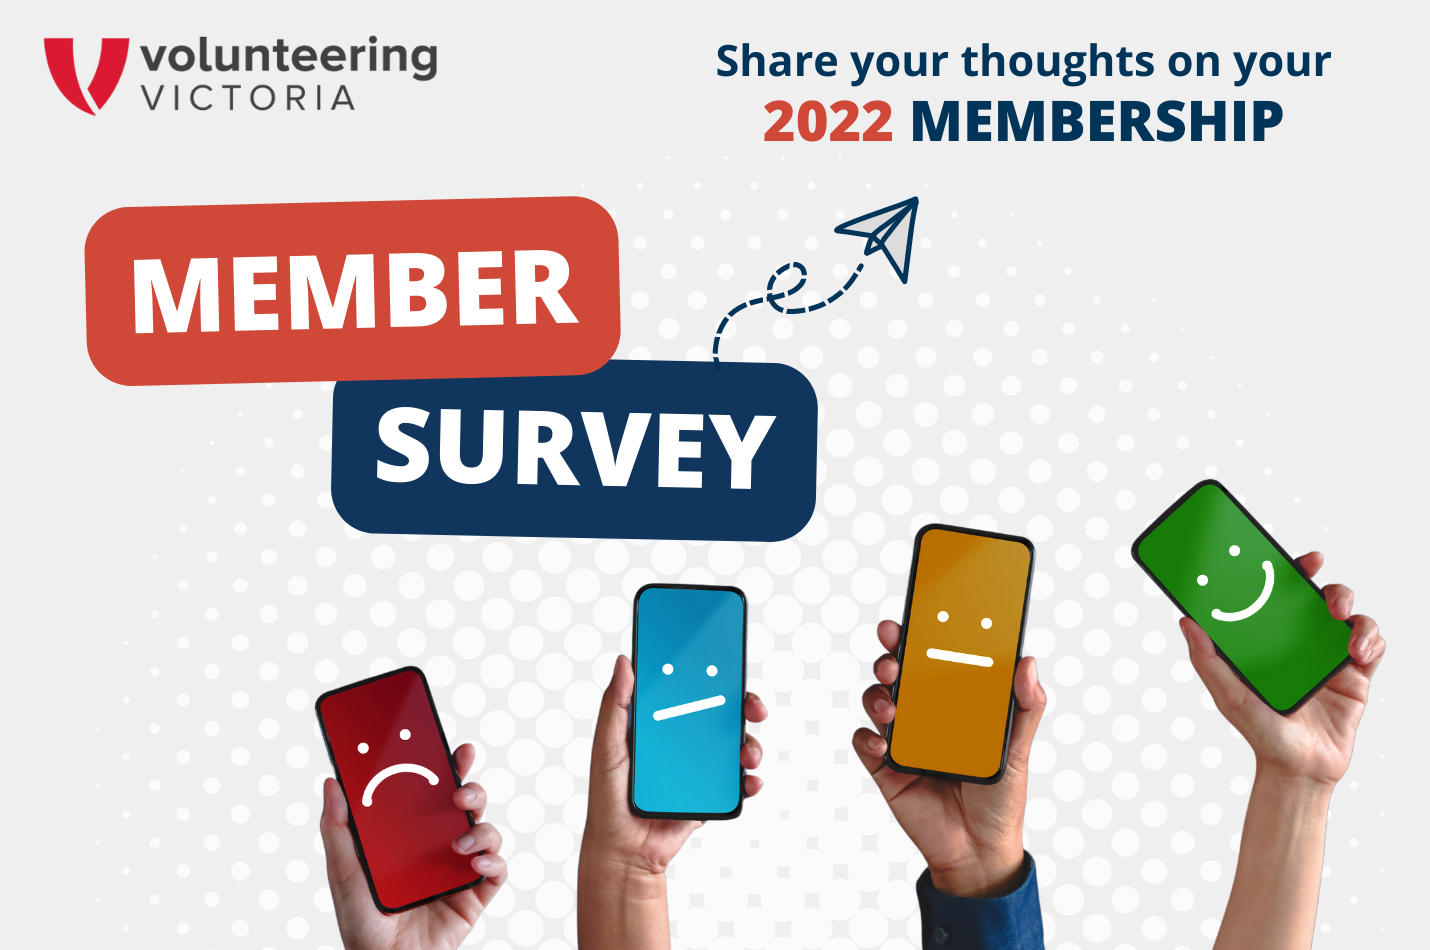 Volunteering Victoria Member Survey - Click to share your thoughts on your 2022 membership